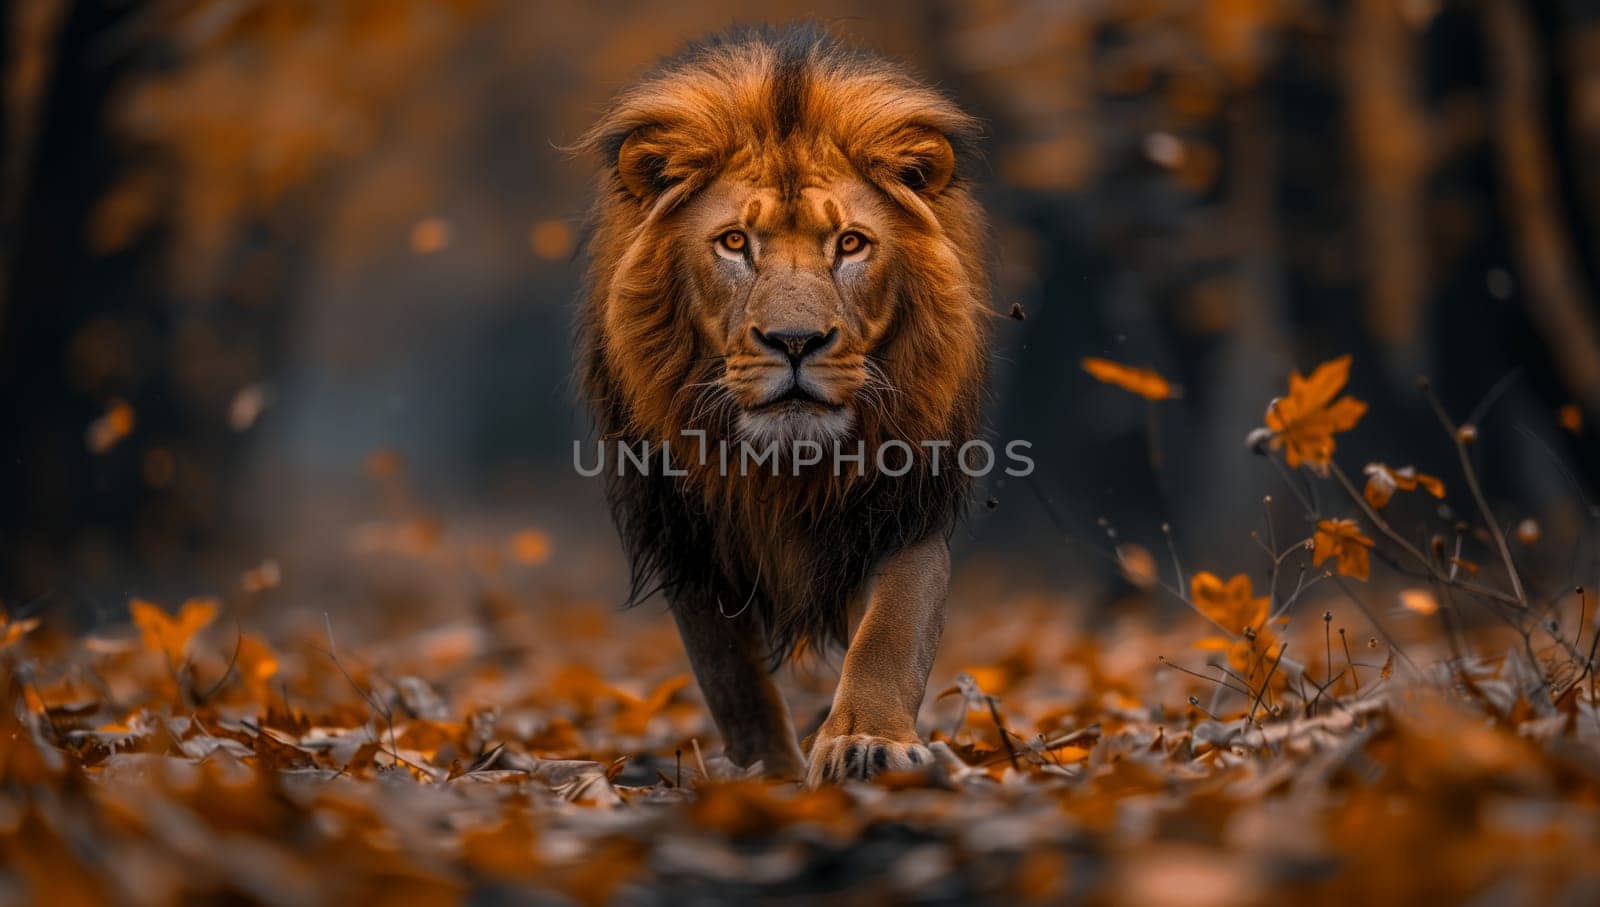 A Felidae Carnivore, the Masai lion, with its distinctive mane, walks through a forest of leaves. This big cat, known for its powerful roar, is a terrestrial animal in its natural landscape